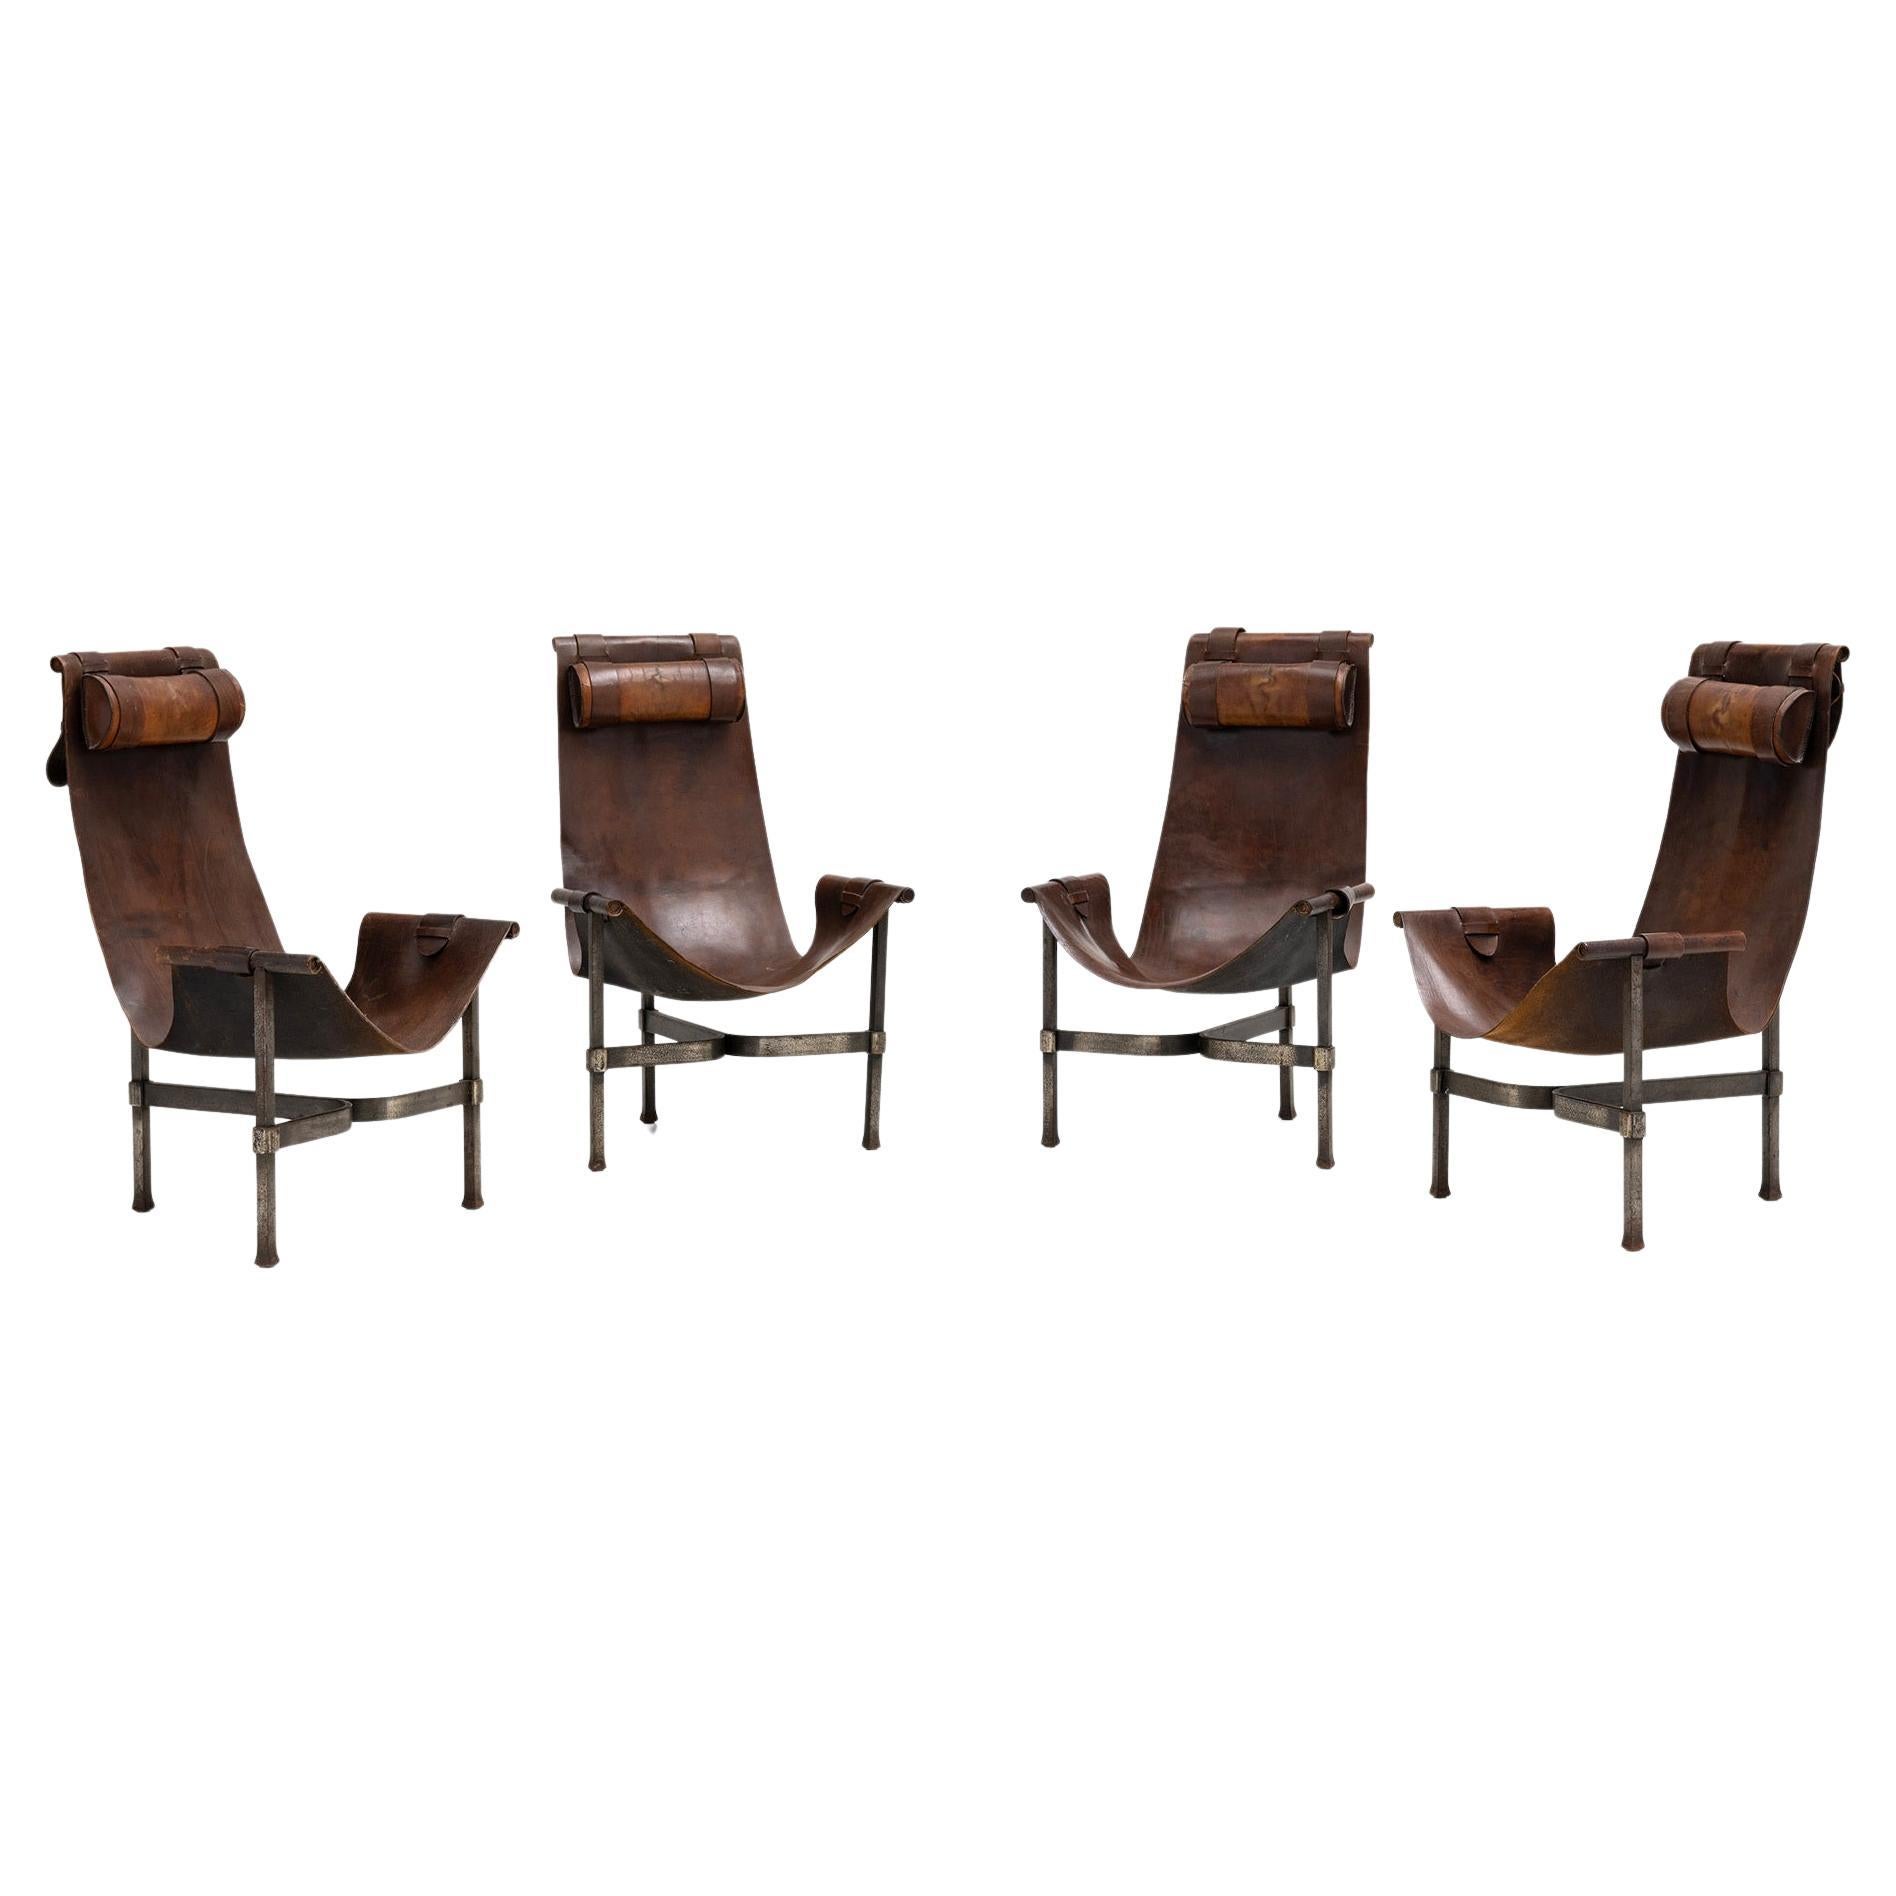 Steel & Leather Sling Chairs, Spain, Circa 1960